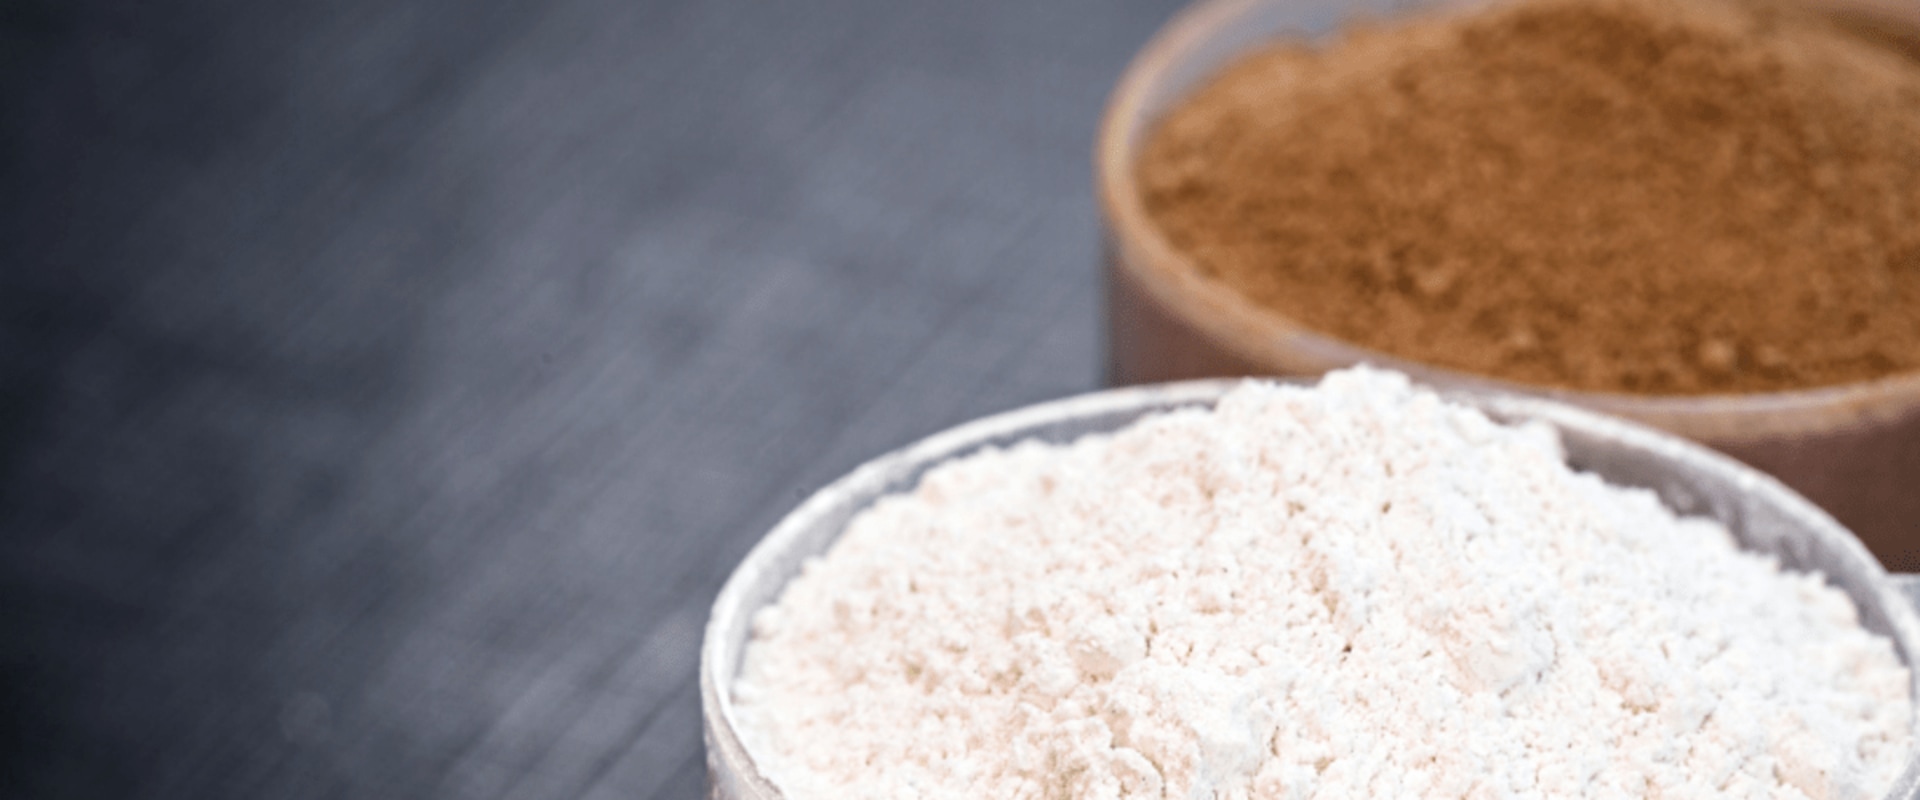 Is Whey Protein Gluten and Soy Free? - A Comprehensive Guide